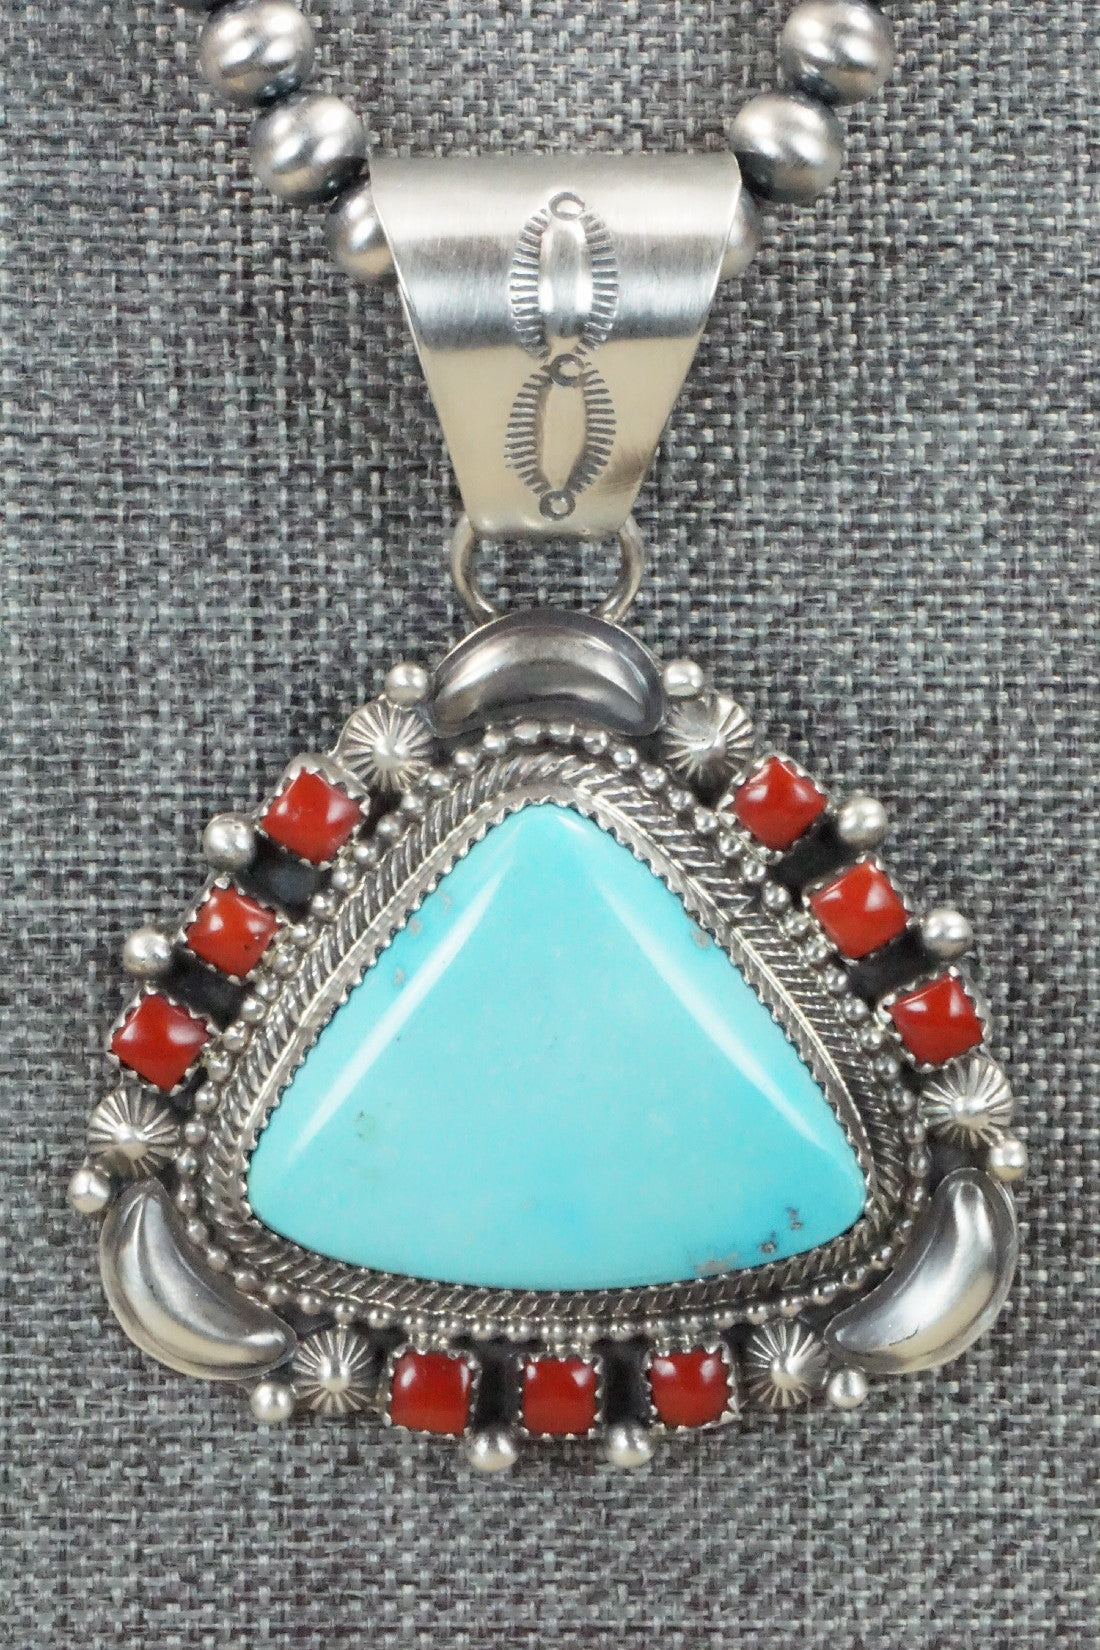 Turquoise, Coral Pendant & Sterling Silver Necklace - Tom Lewis